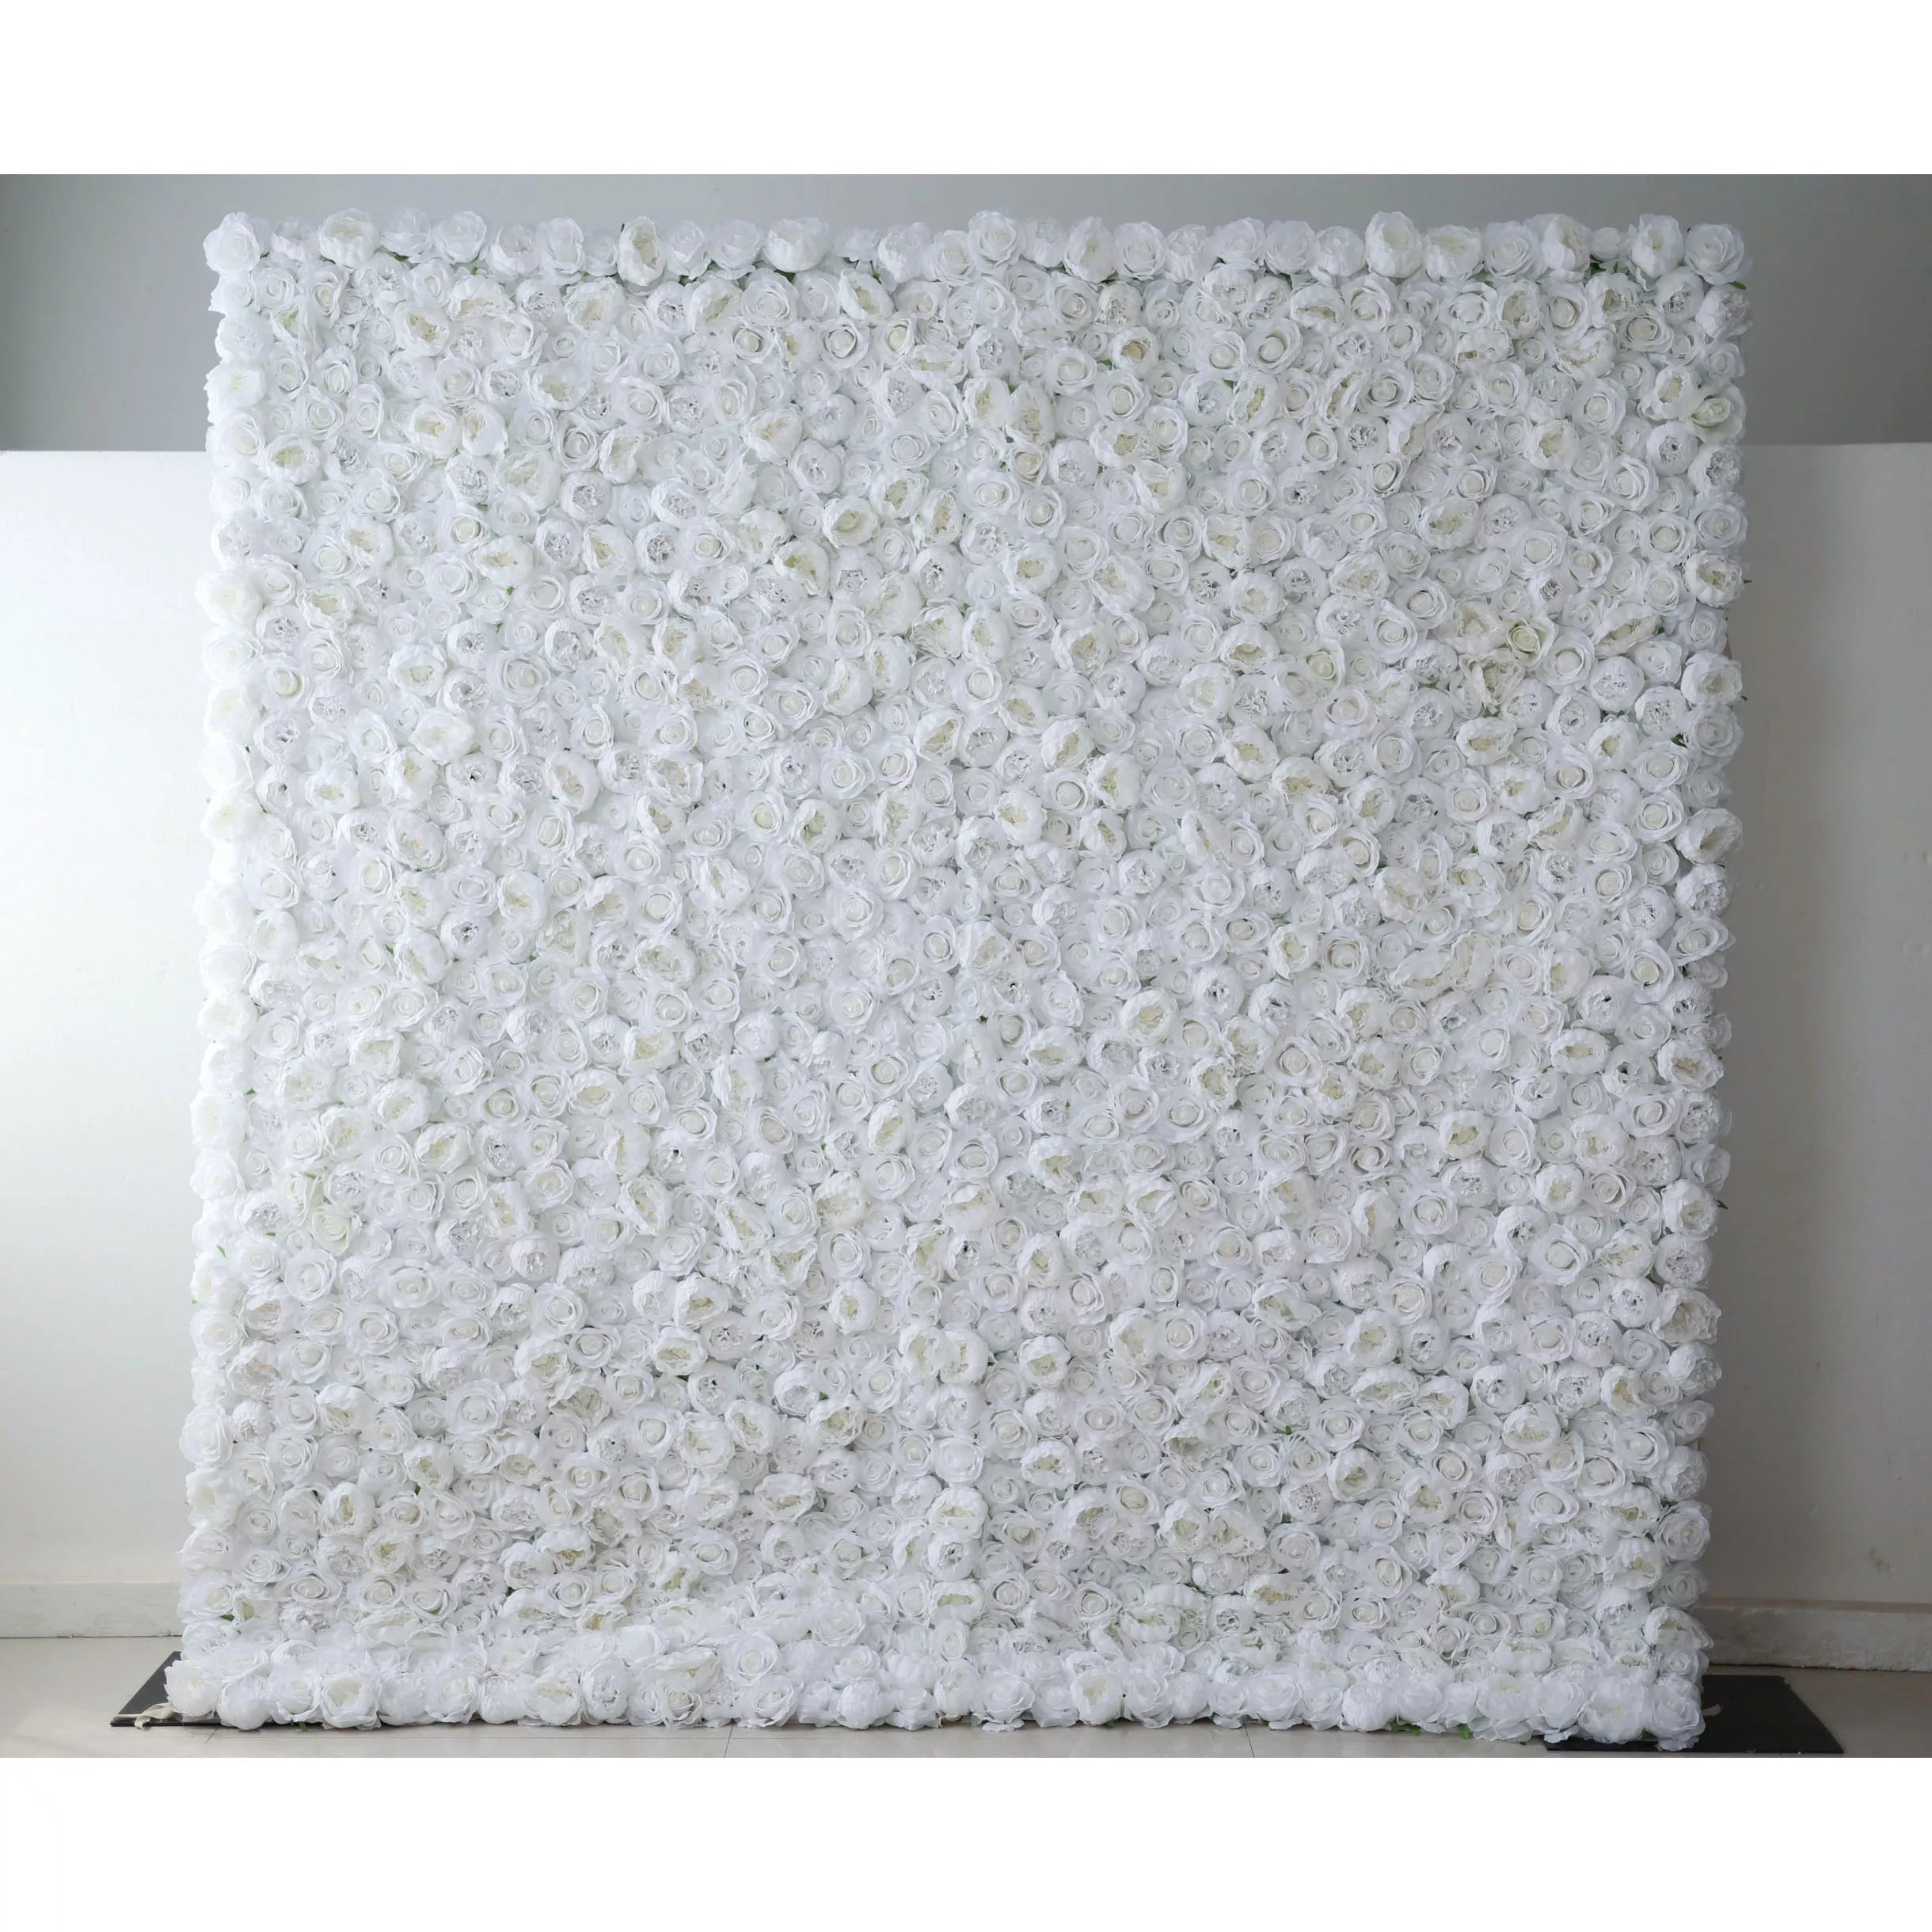 Valar Flowers' Artificial Fabric Flower Wall: White Blossom Bliss. A sea of densely packed white roses, projecting sophistication, timeless beauty, and pure romance, ideal for events cherishing elegance and captivating allure.